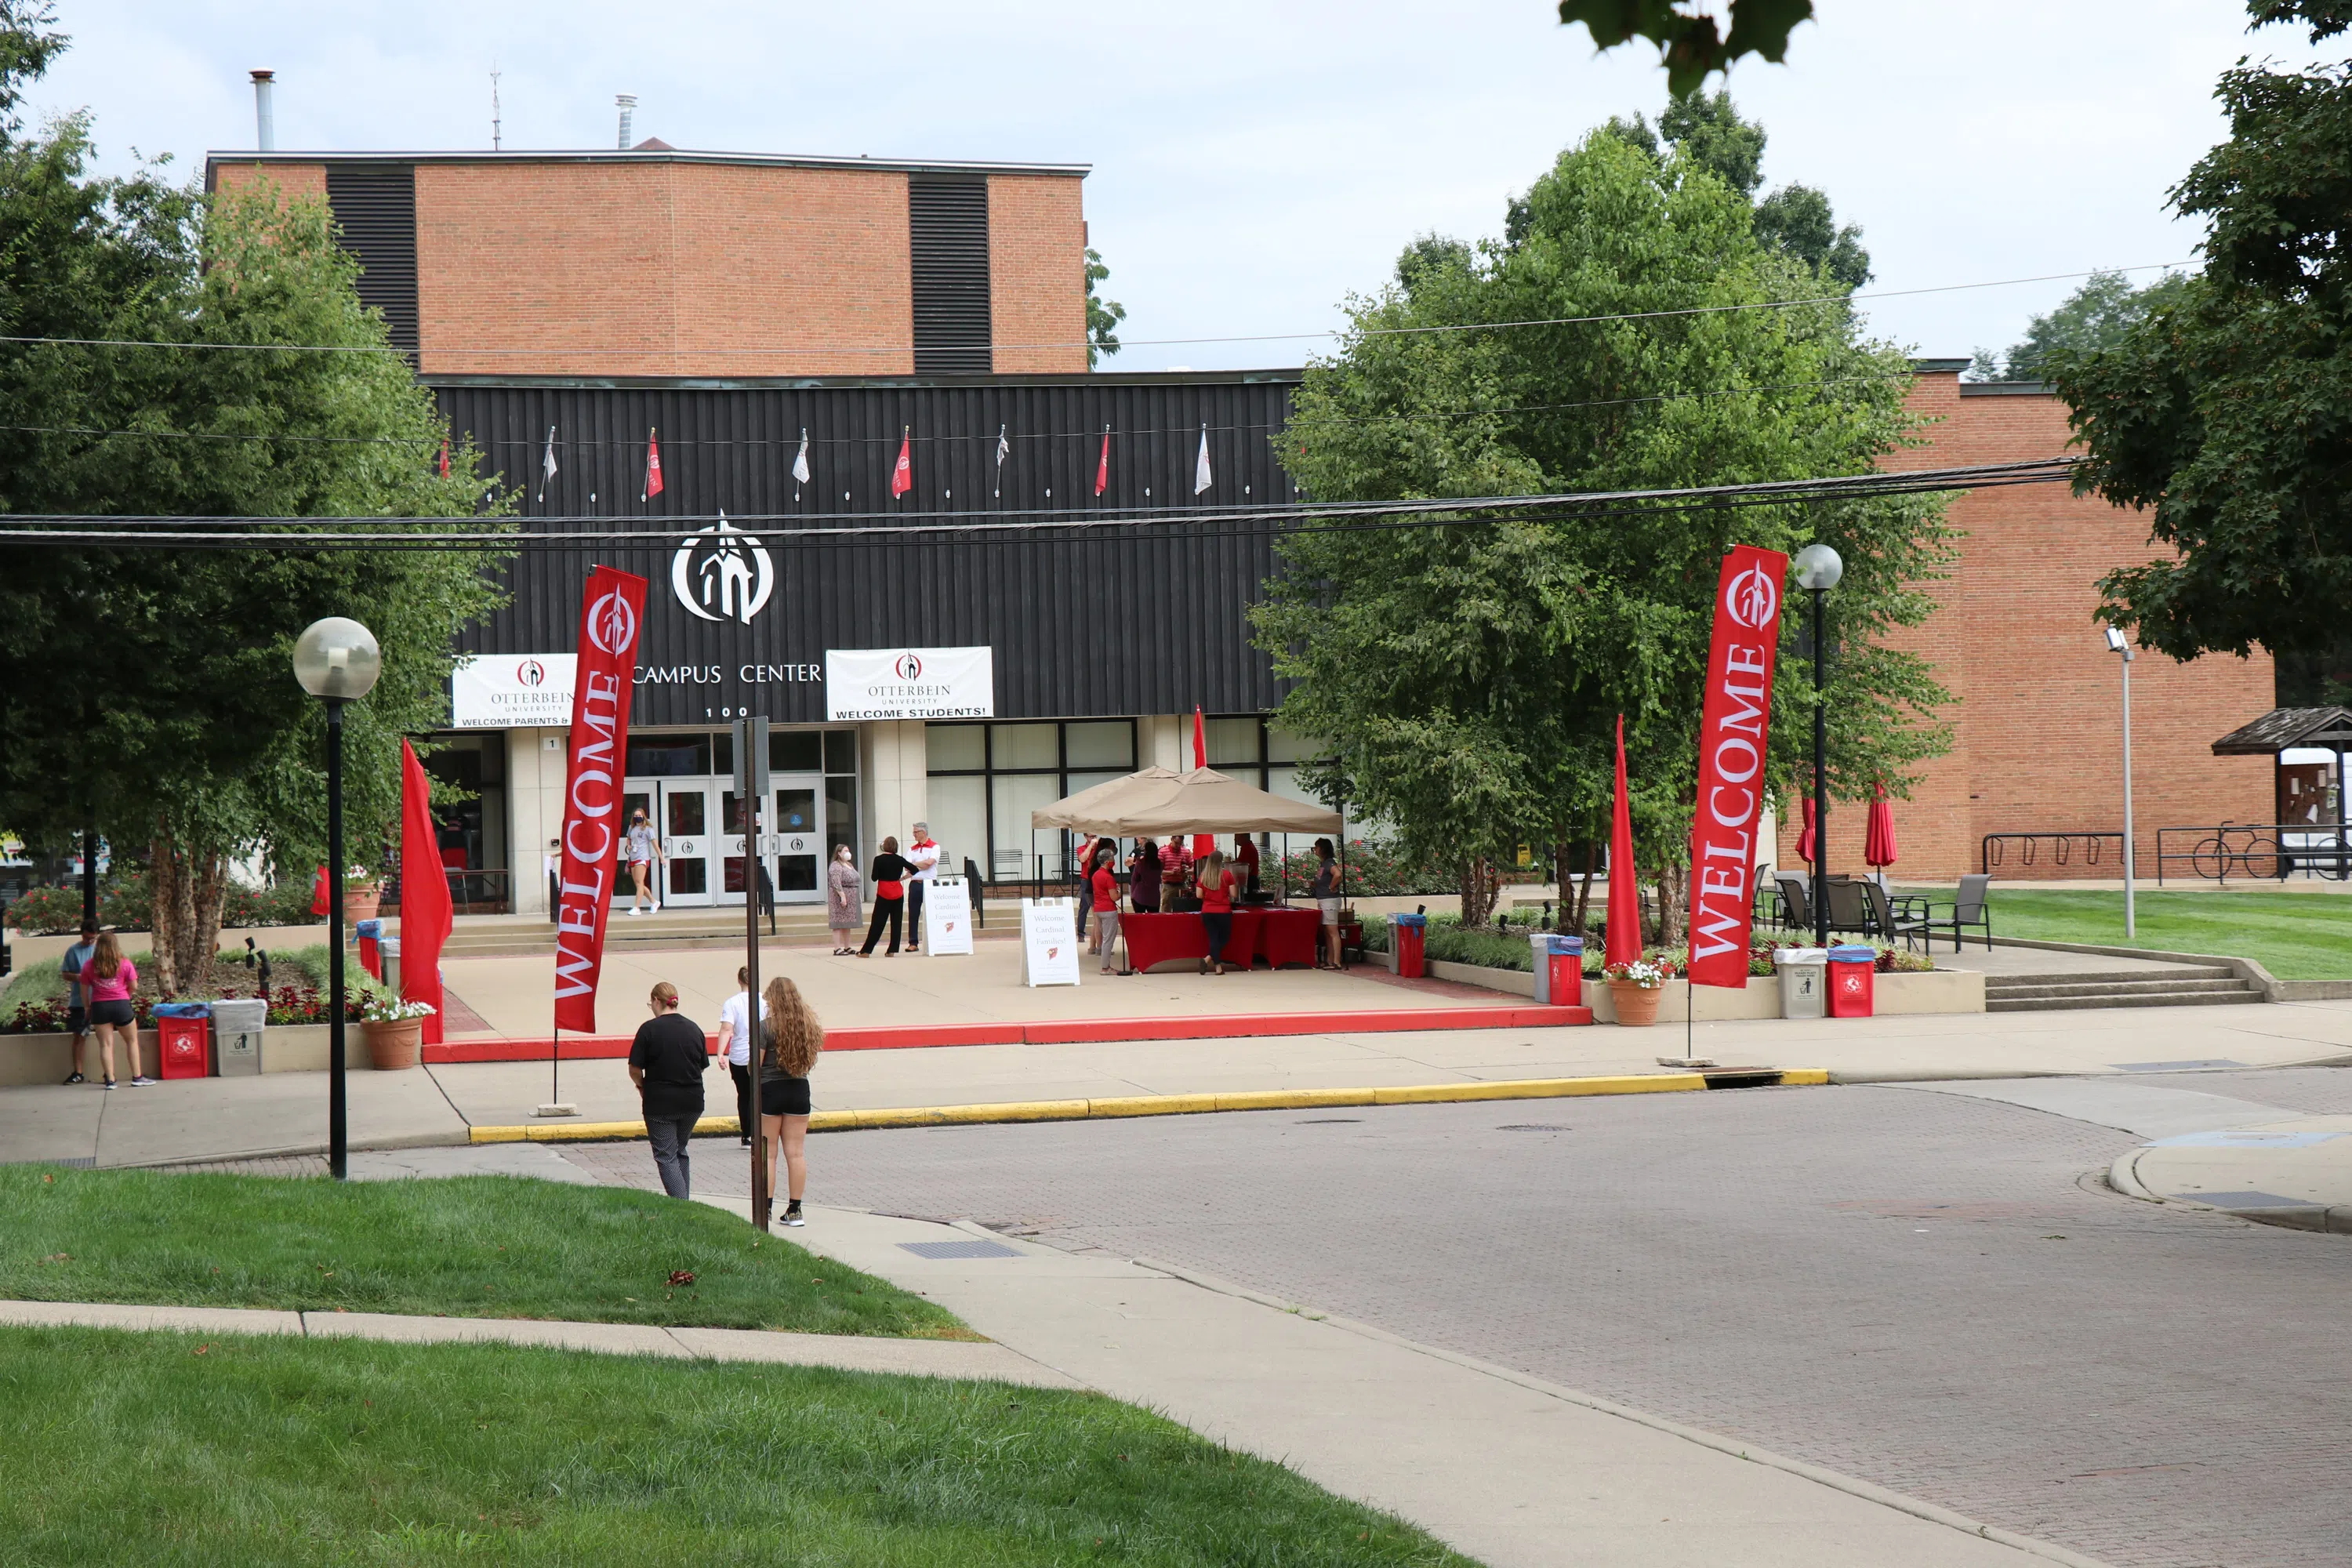 Street view of the Otterbein Campus Center.